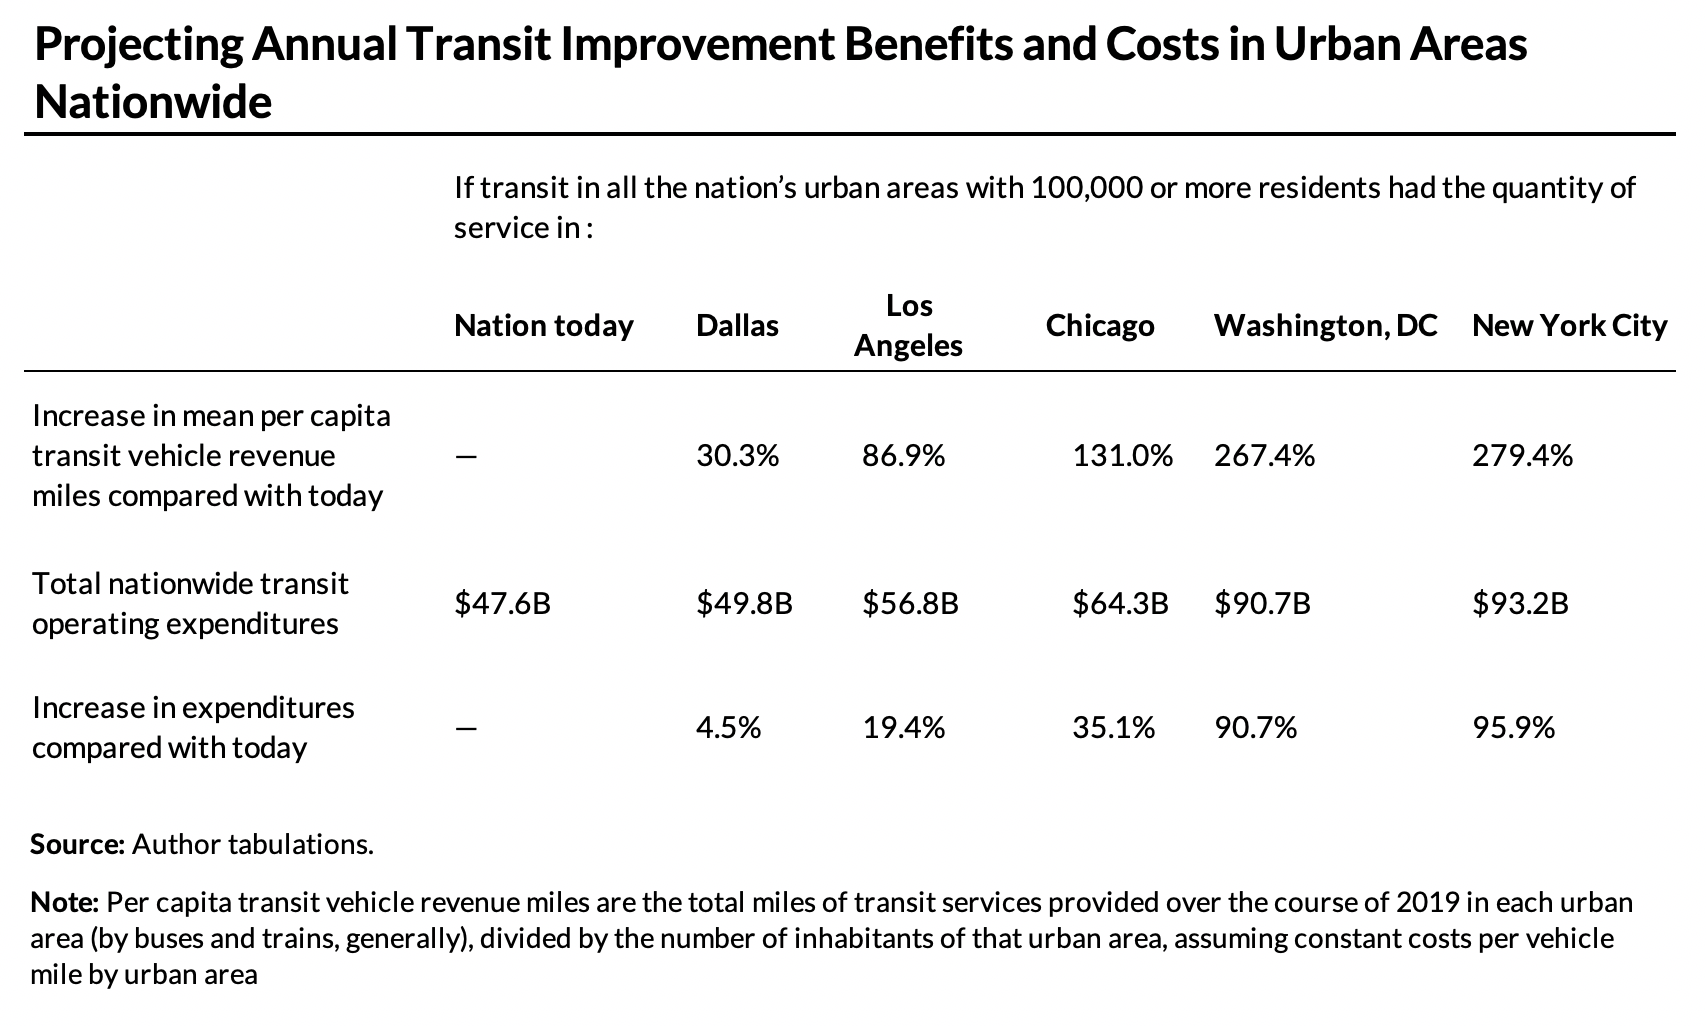 Projected transit improvement benefits and costs nationwide